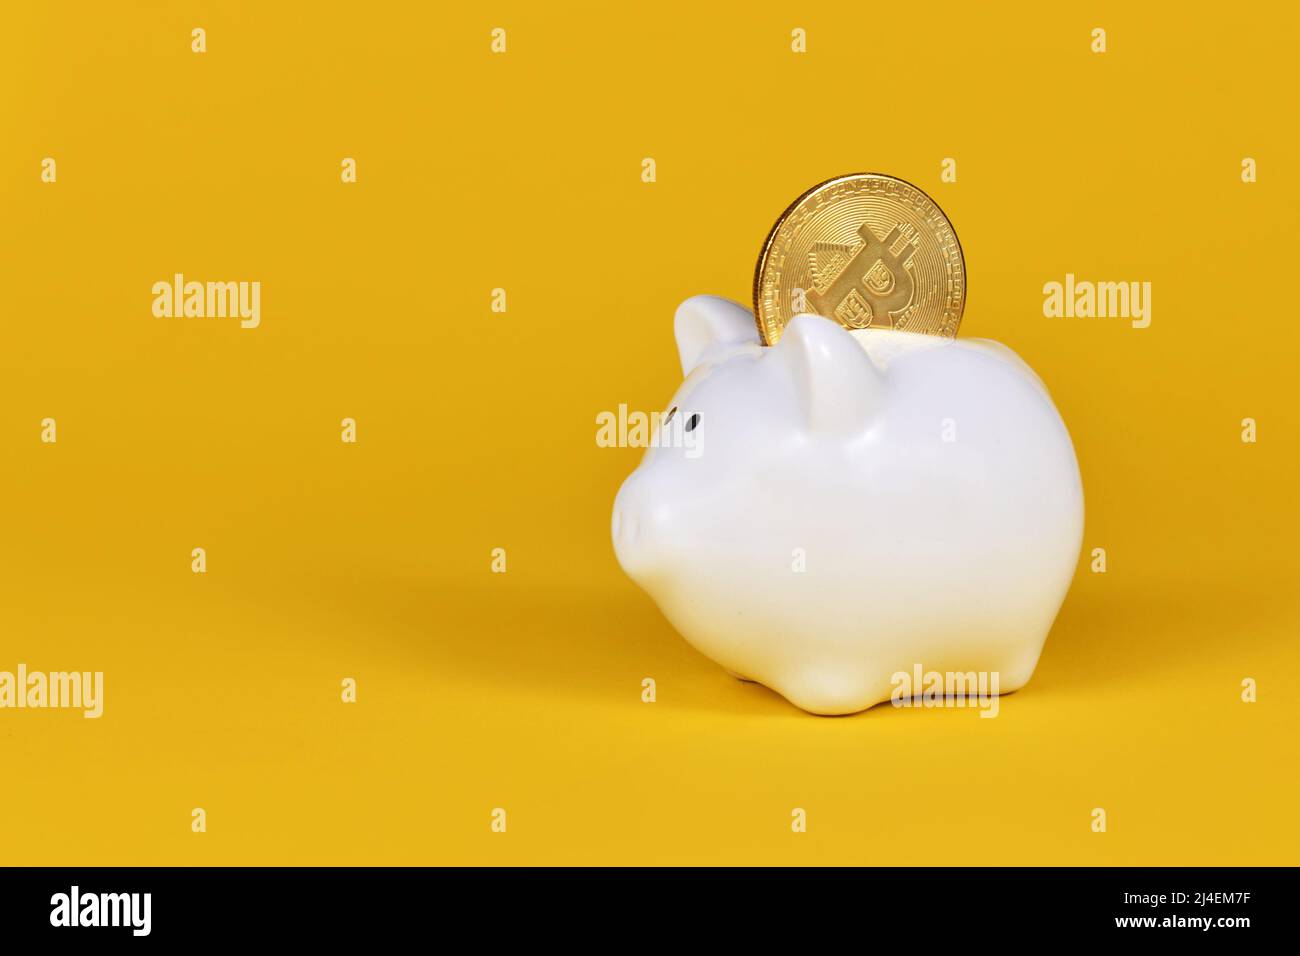 Crypto currency bitcoin in white piggy bank on yellow background Stock Photo